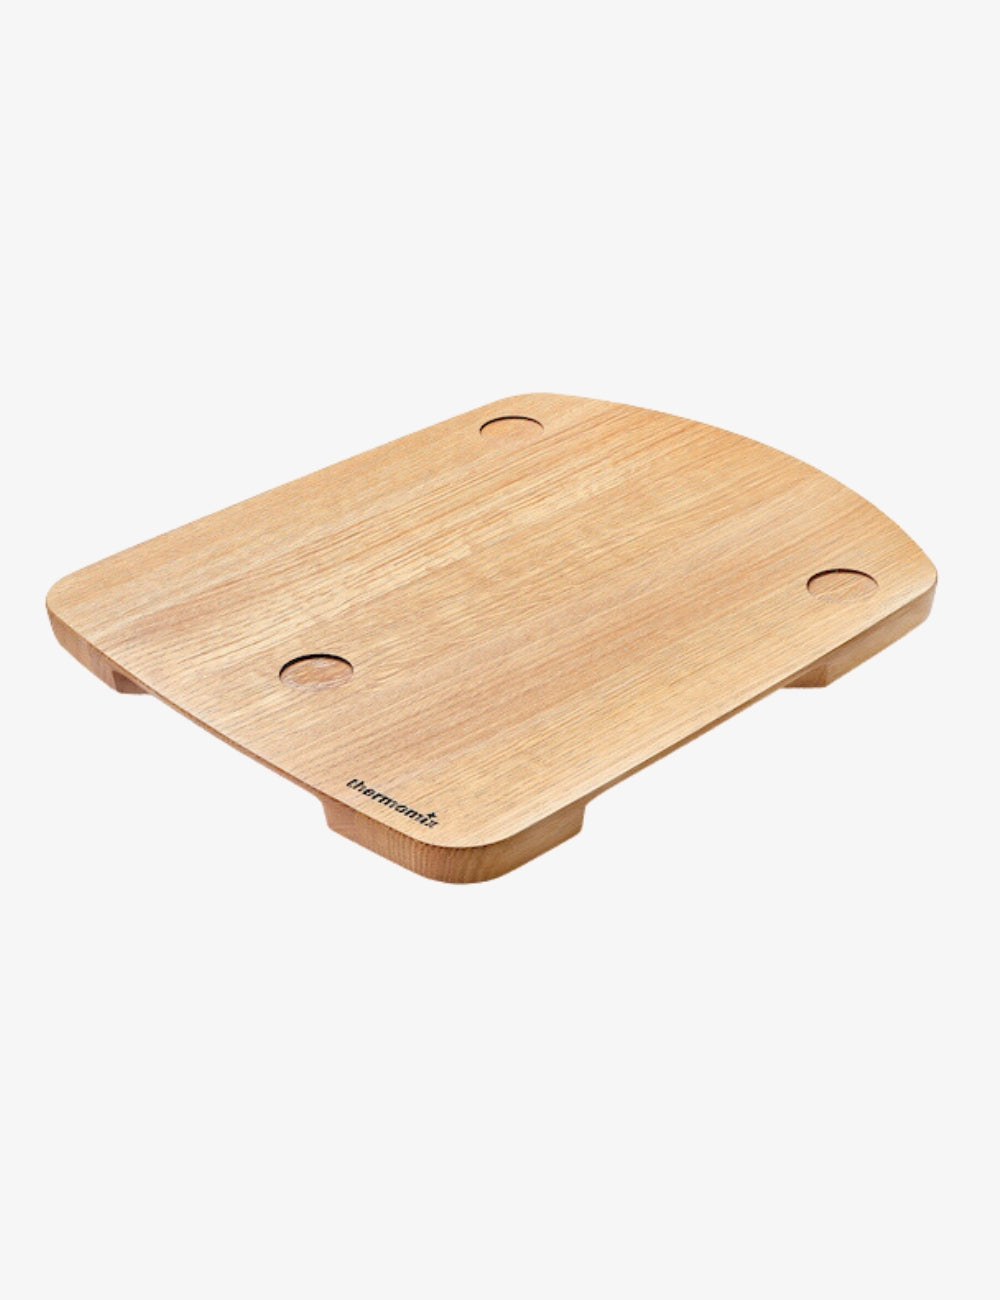 Plastic Pizza Cutting Board With Handle - Round from MISKA